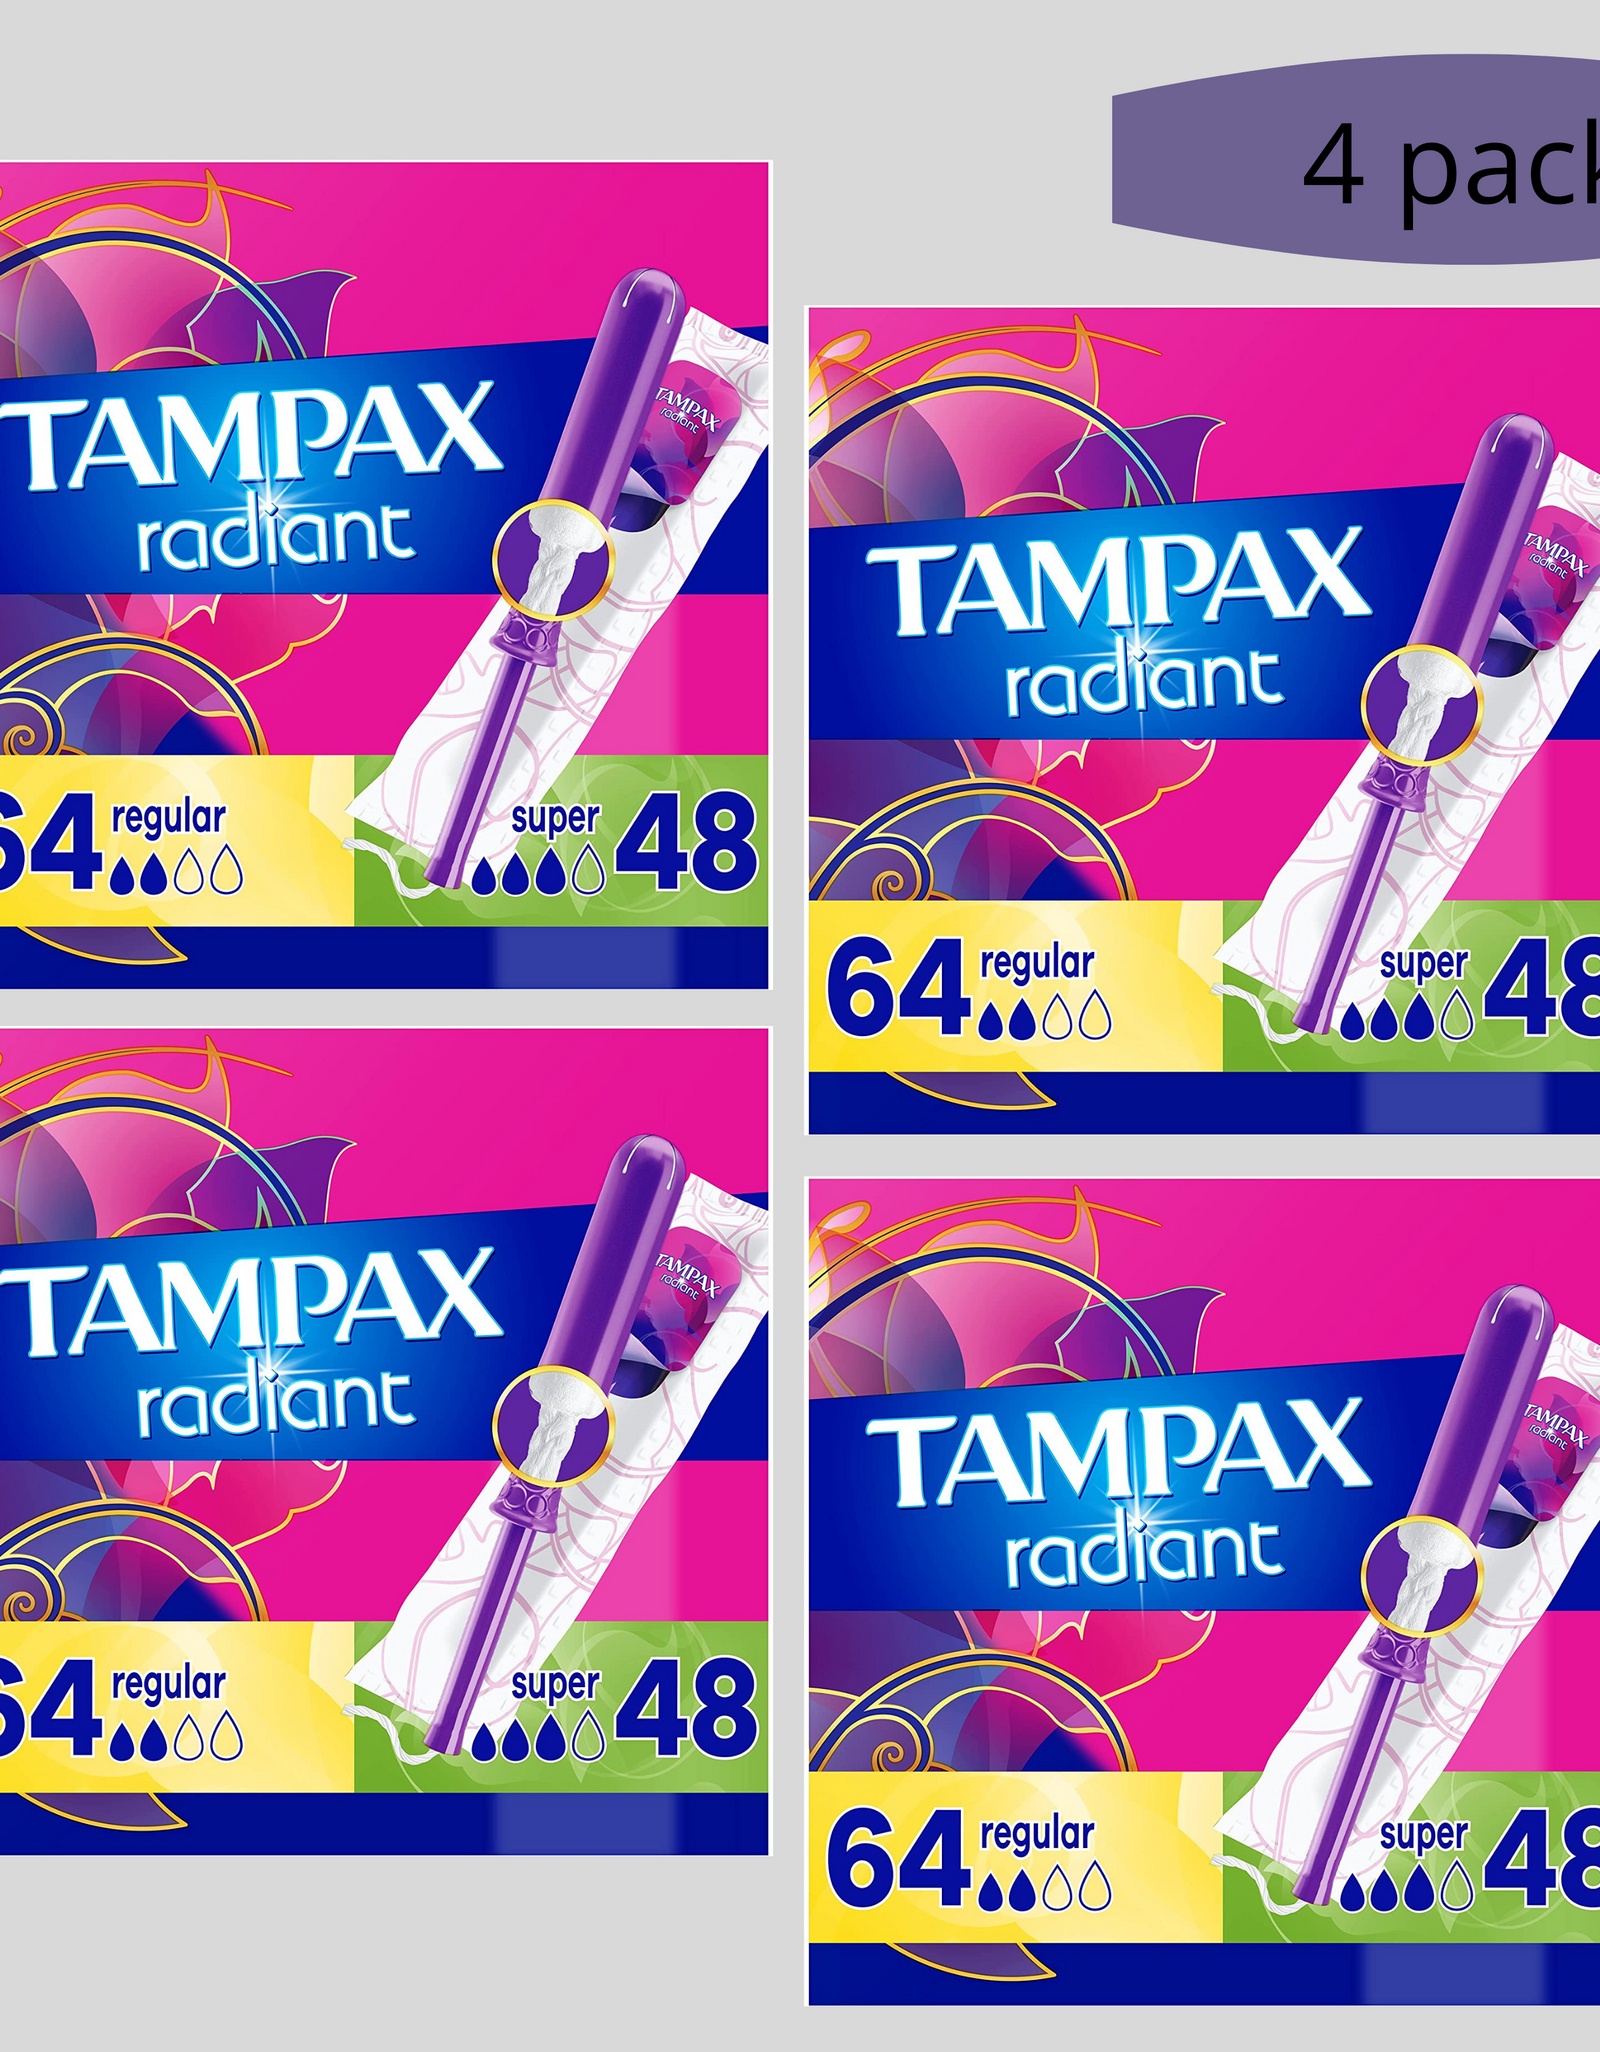 Tampax Radiant Tampons Duopack, 4 pack of 28's (Total 112 Count)